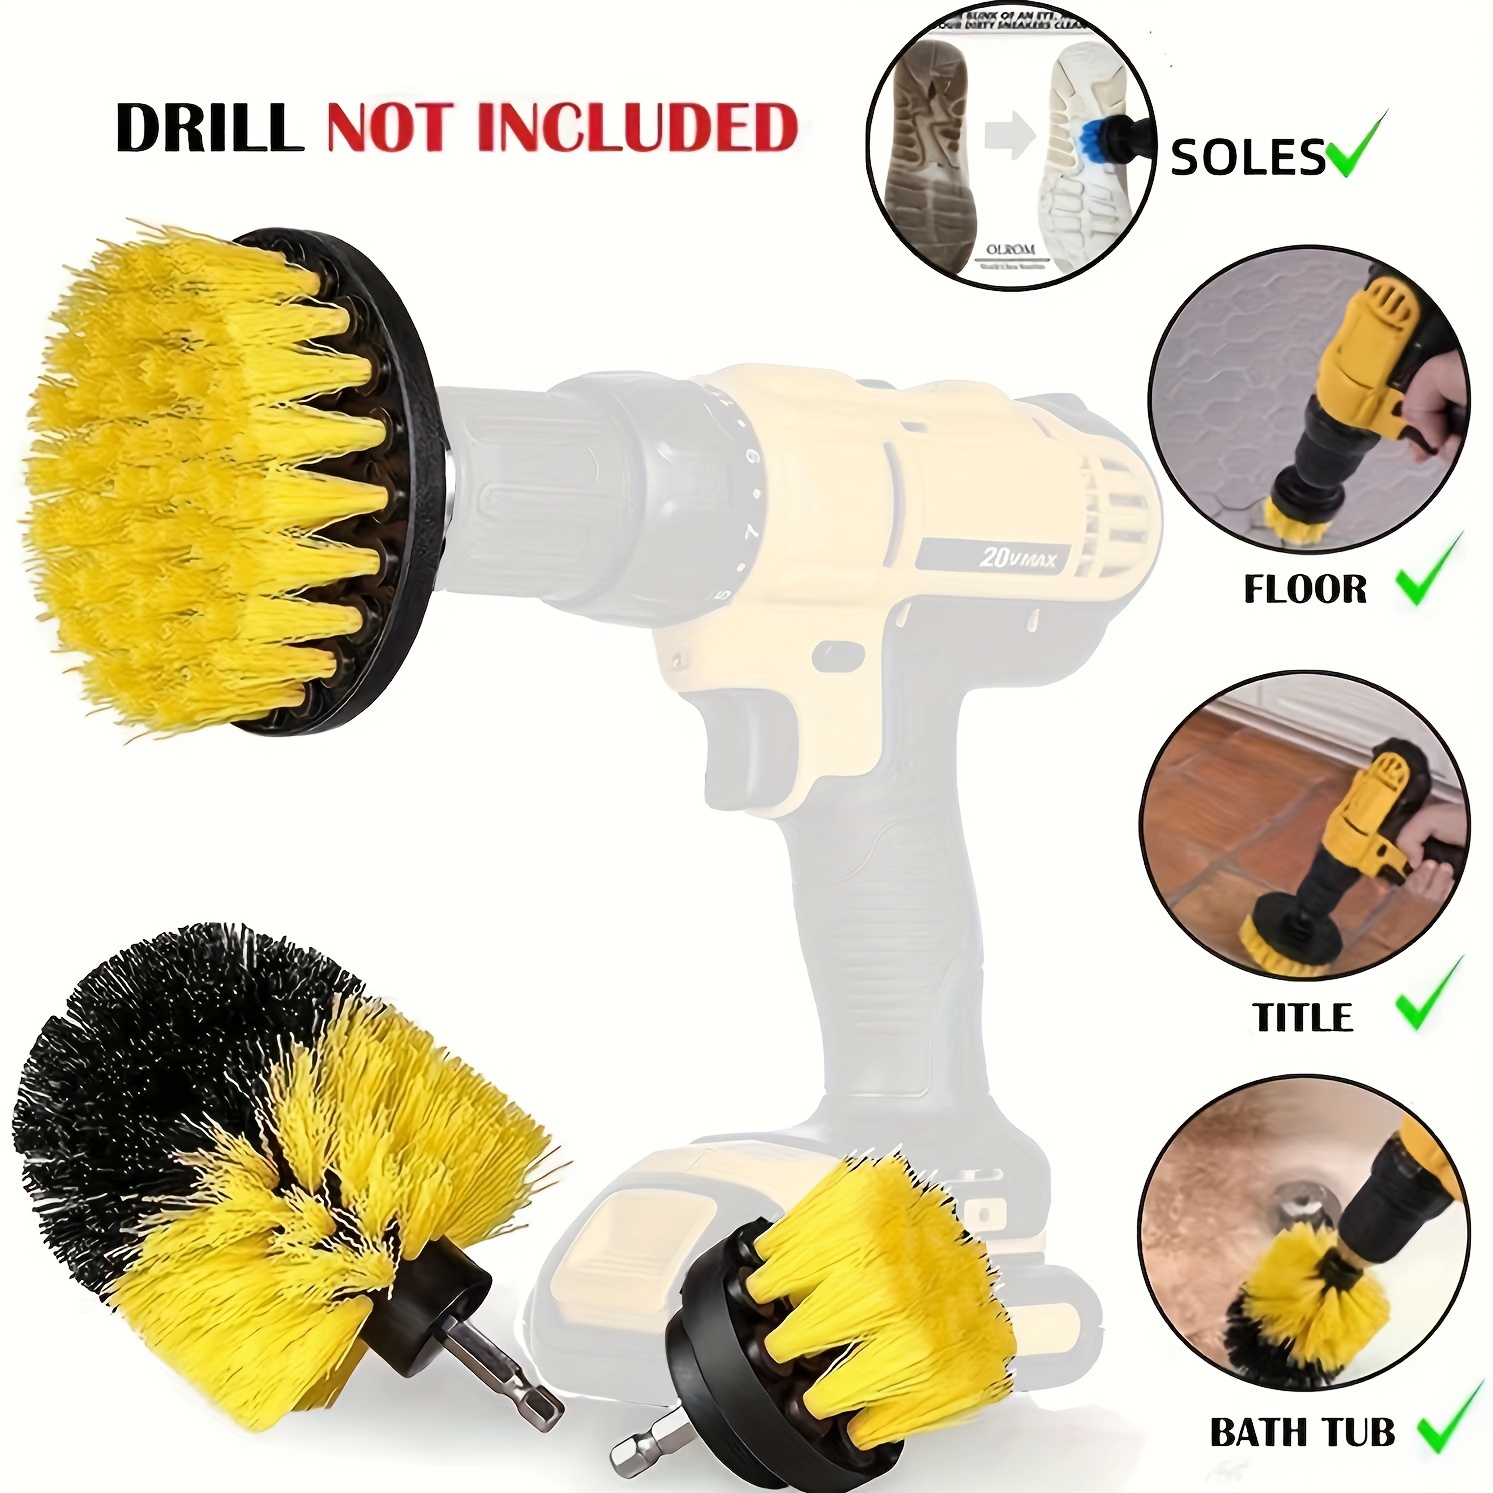 Drill Brush Attachment Set - Power Scrubber Brush Cleaning Kit - All  Purpose Drill Brush With Extend Attachment For Bathroom Surfaces, Car Care,  Grout Floor, Tile, Wall, Dead Corner, Bathtub, Cleaning Supplies